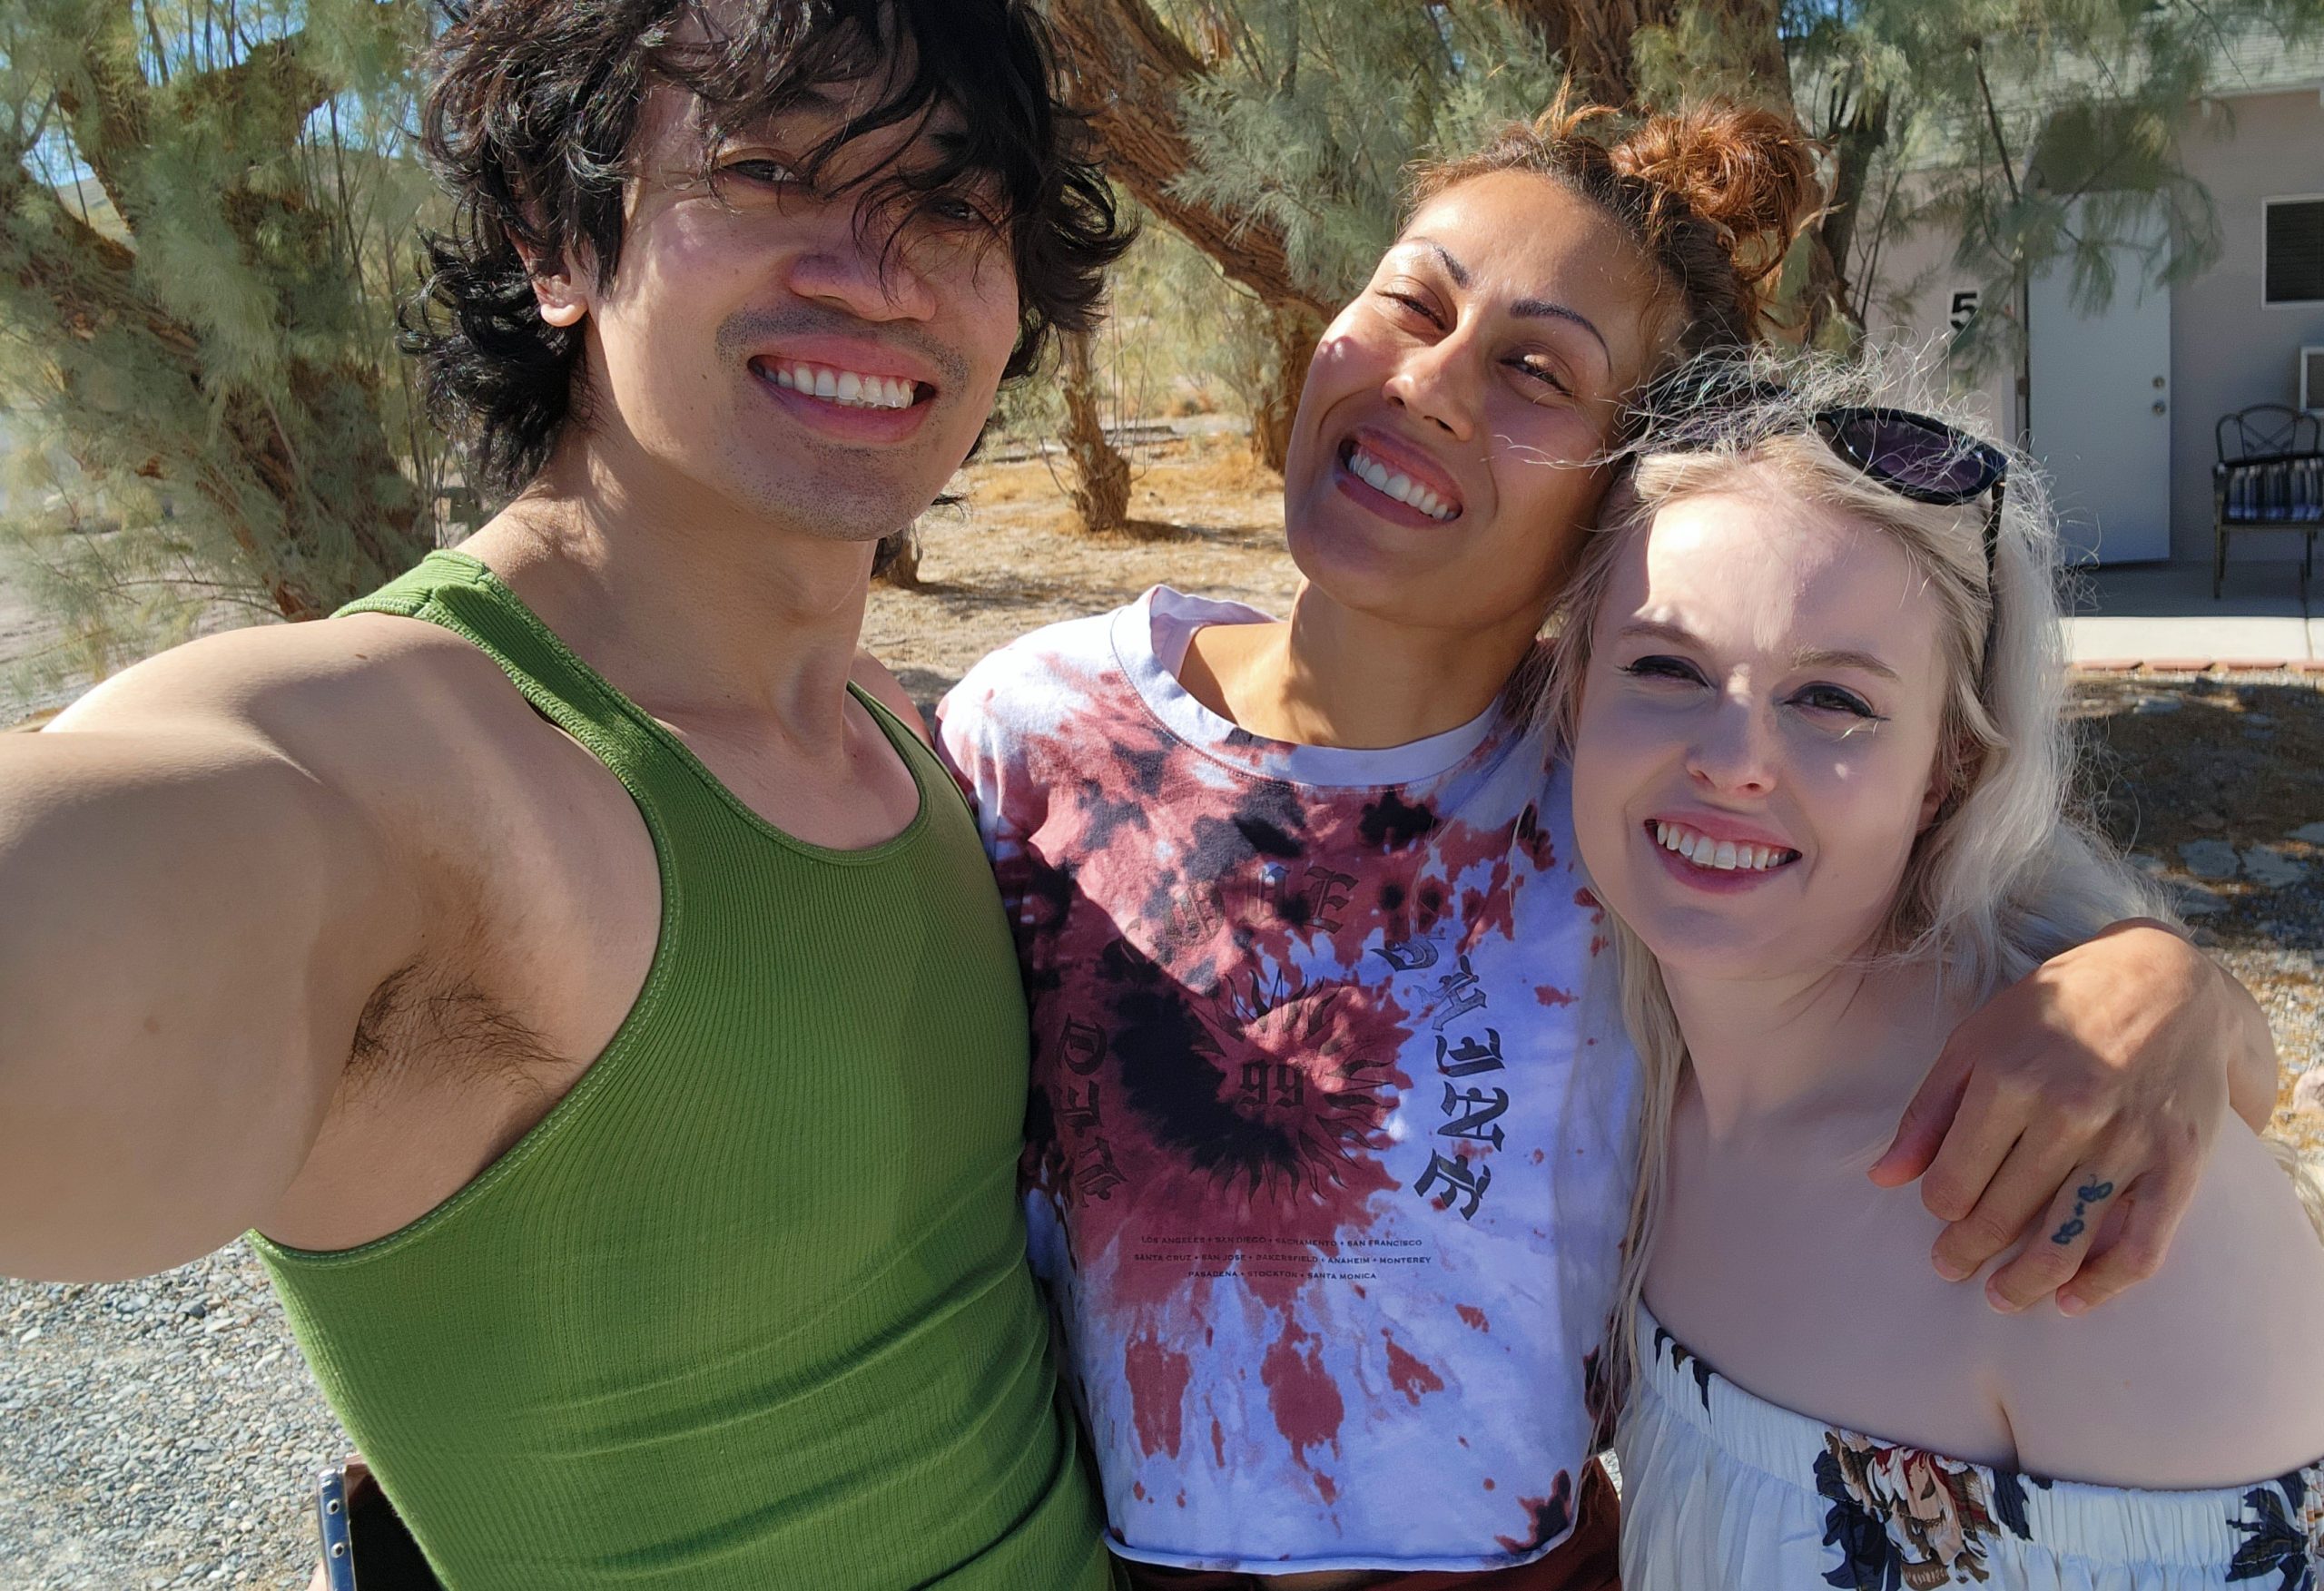 Jax Solomon Cuddle Therapist with a Cuddle Session Just Outside of Nevada at A Hot Spring